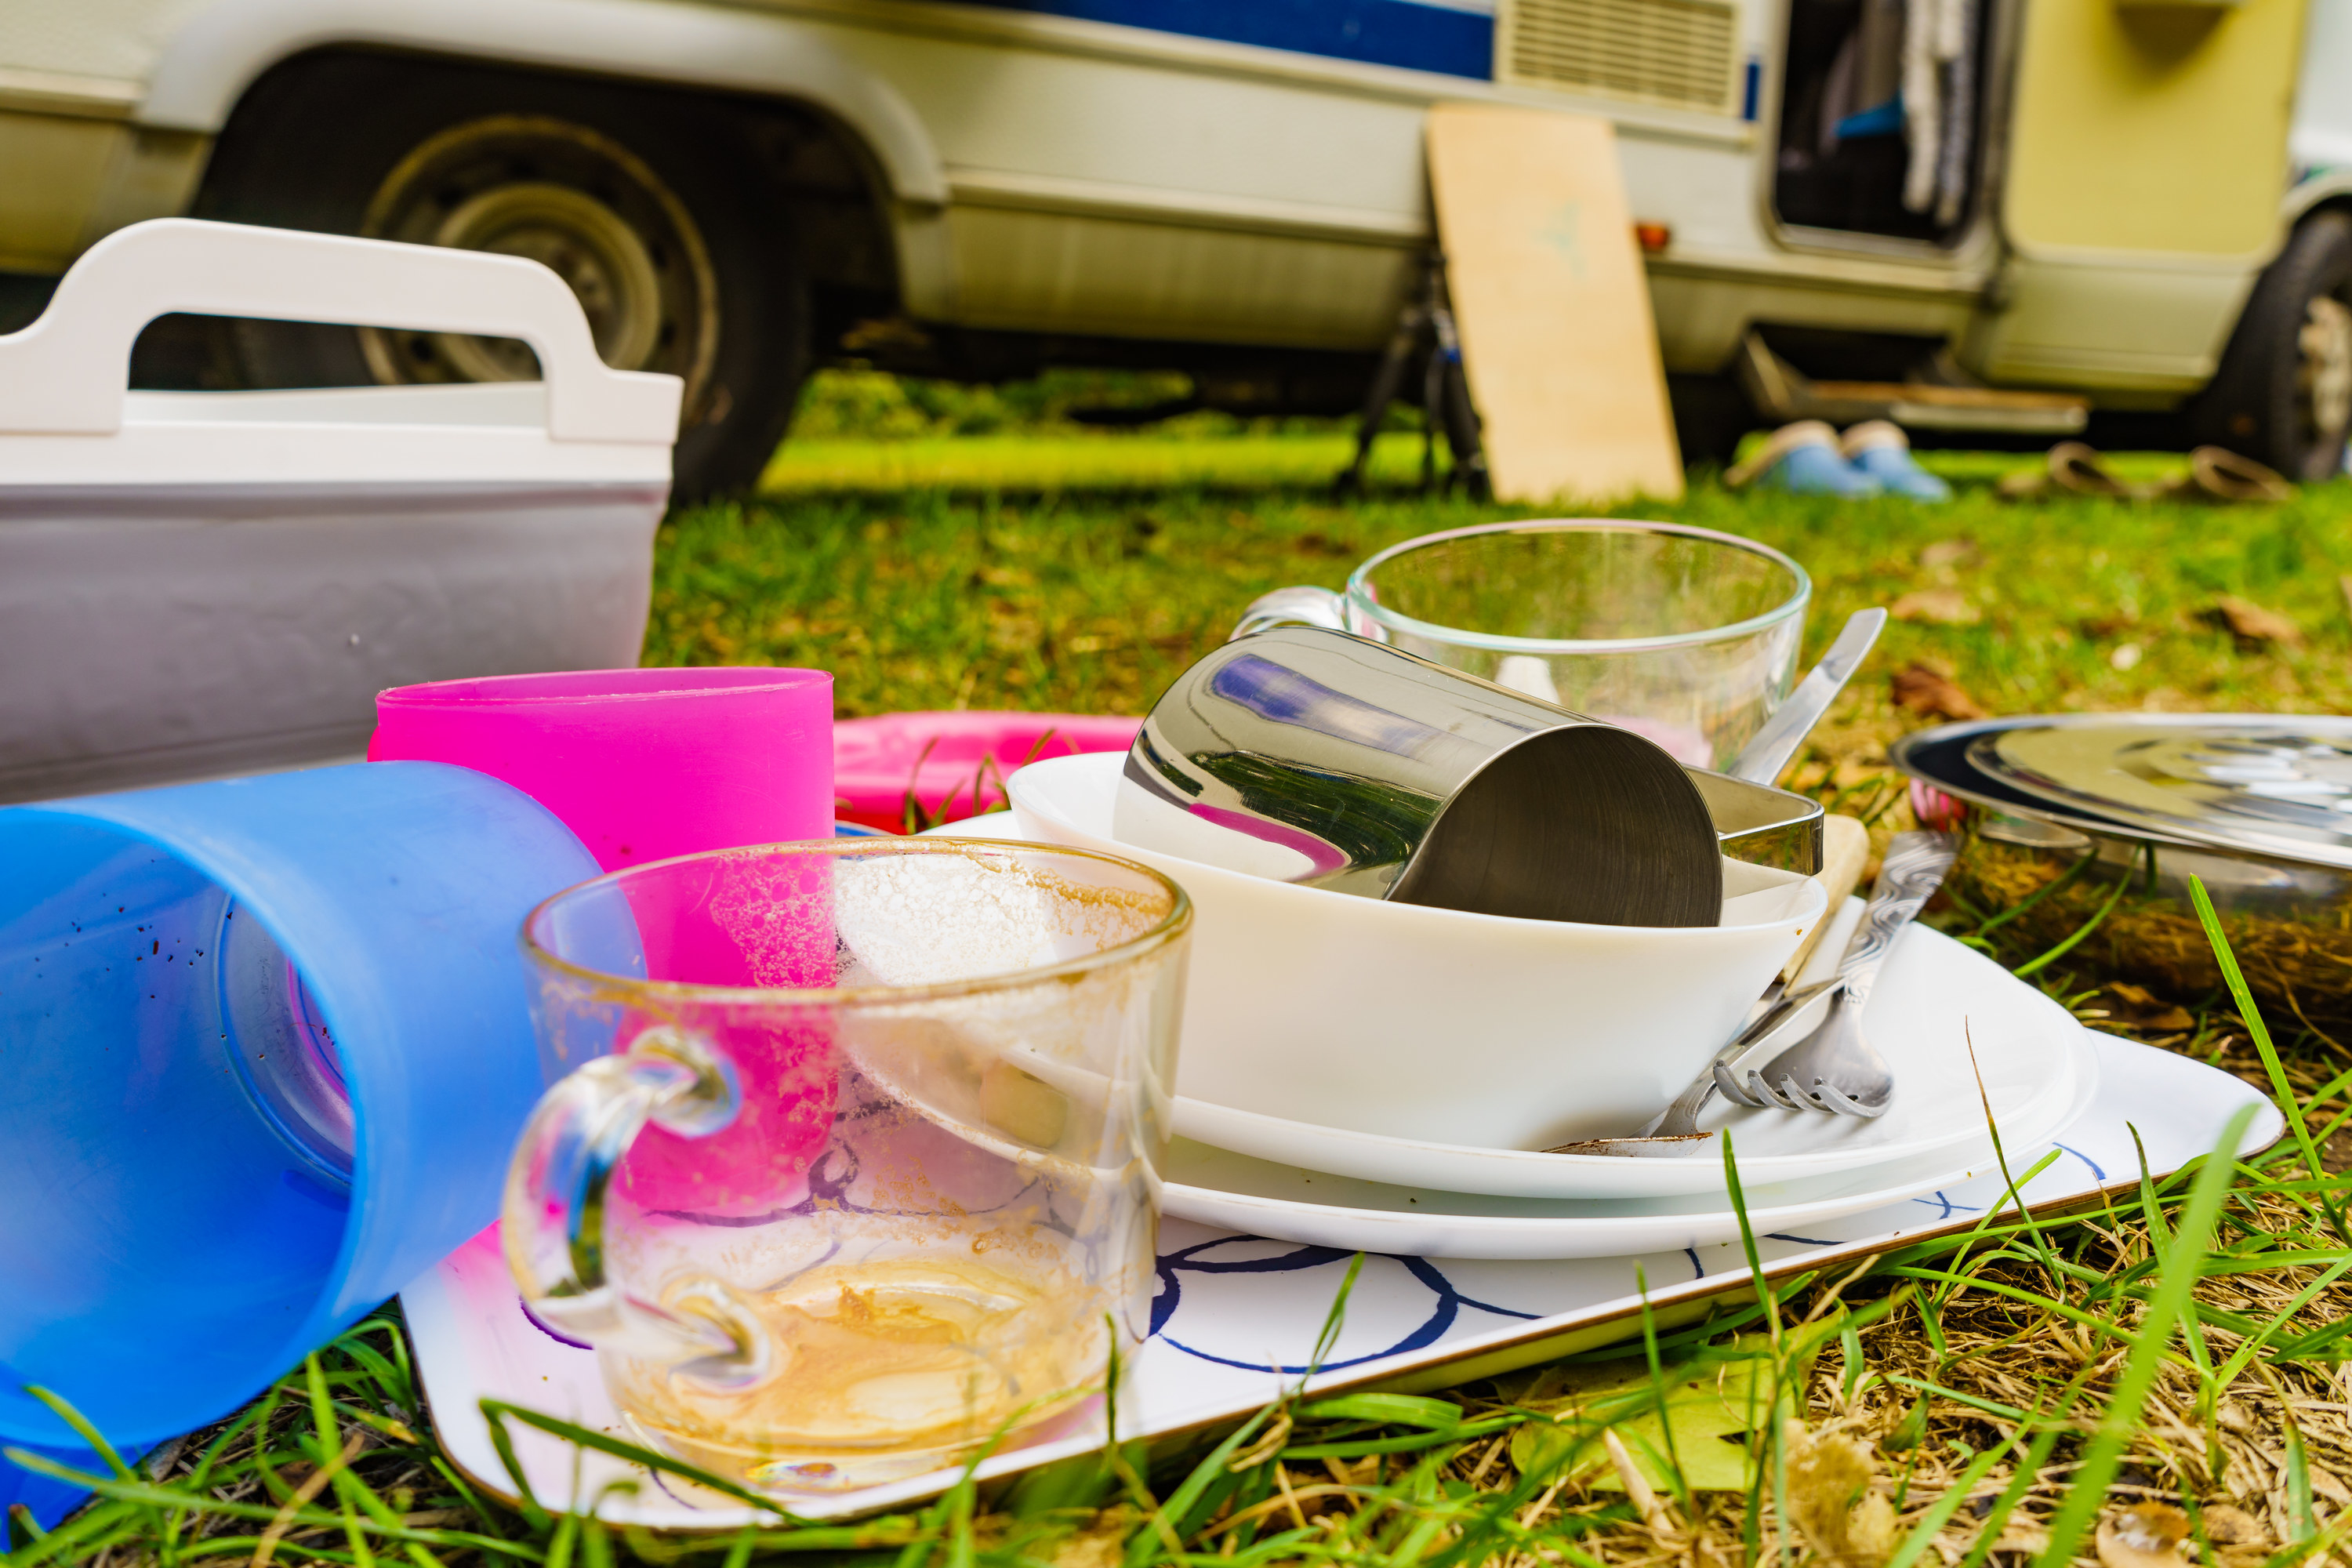 Dirty dishes outdoor against camper vehicle. Washing up on fresh air. Adventure, camping on nature, dishwashing outside